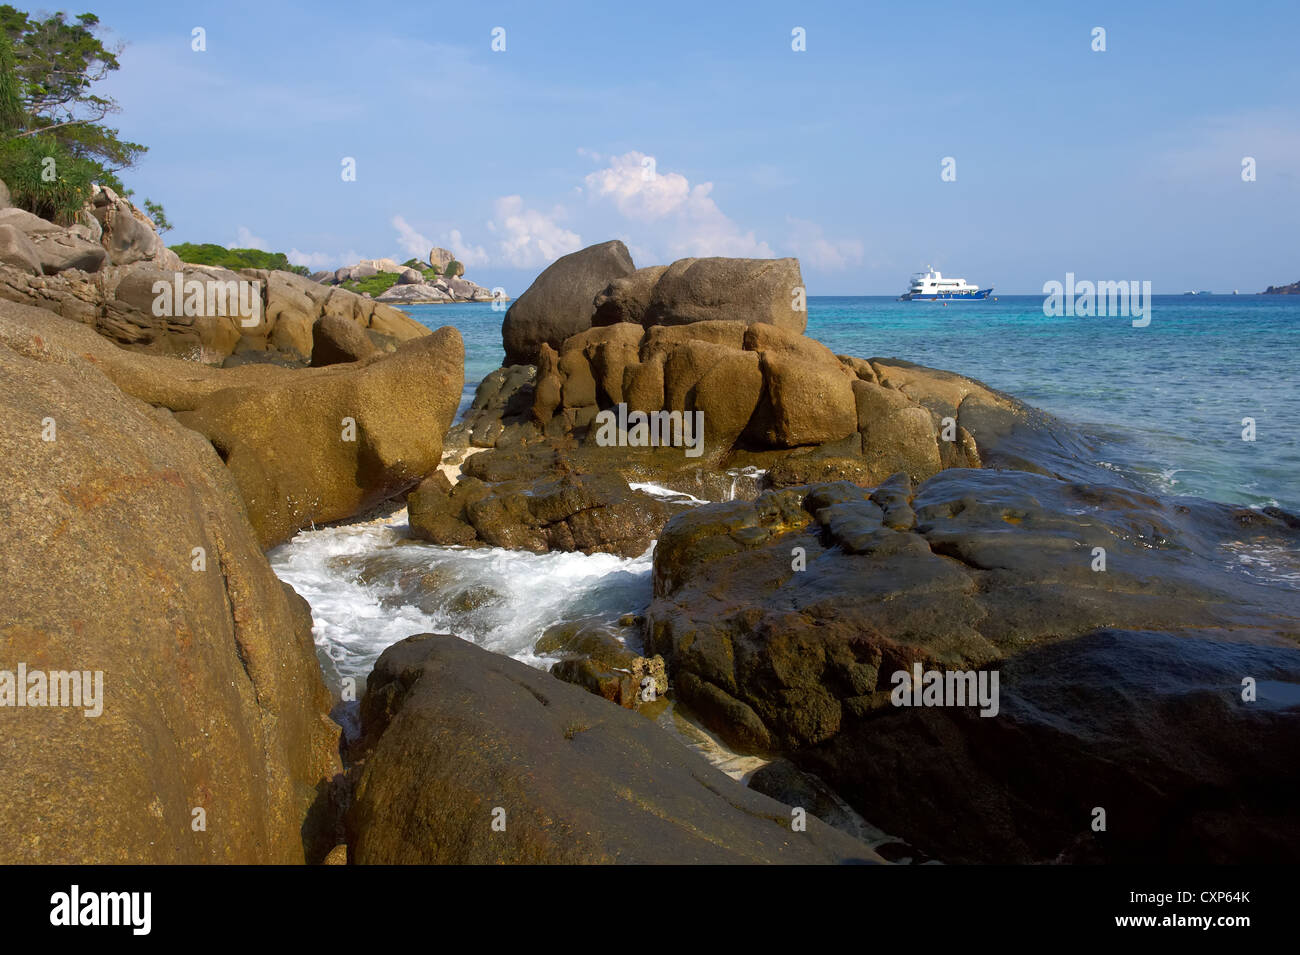 Coastal cliffs and beaches of the Similan Islands in Thailand Stock Photo